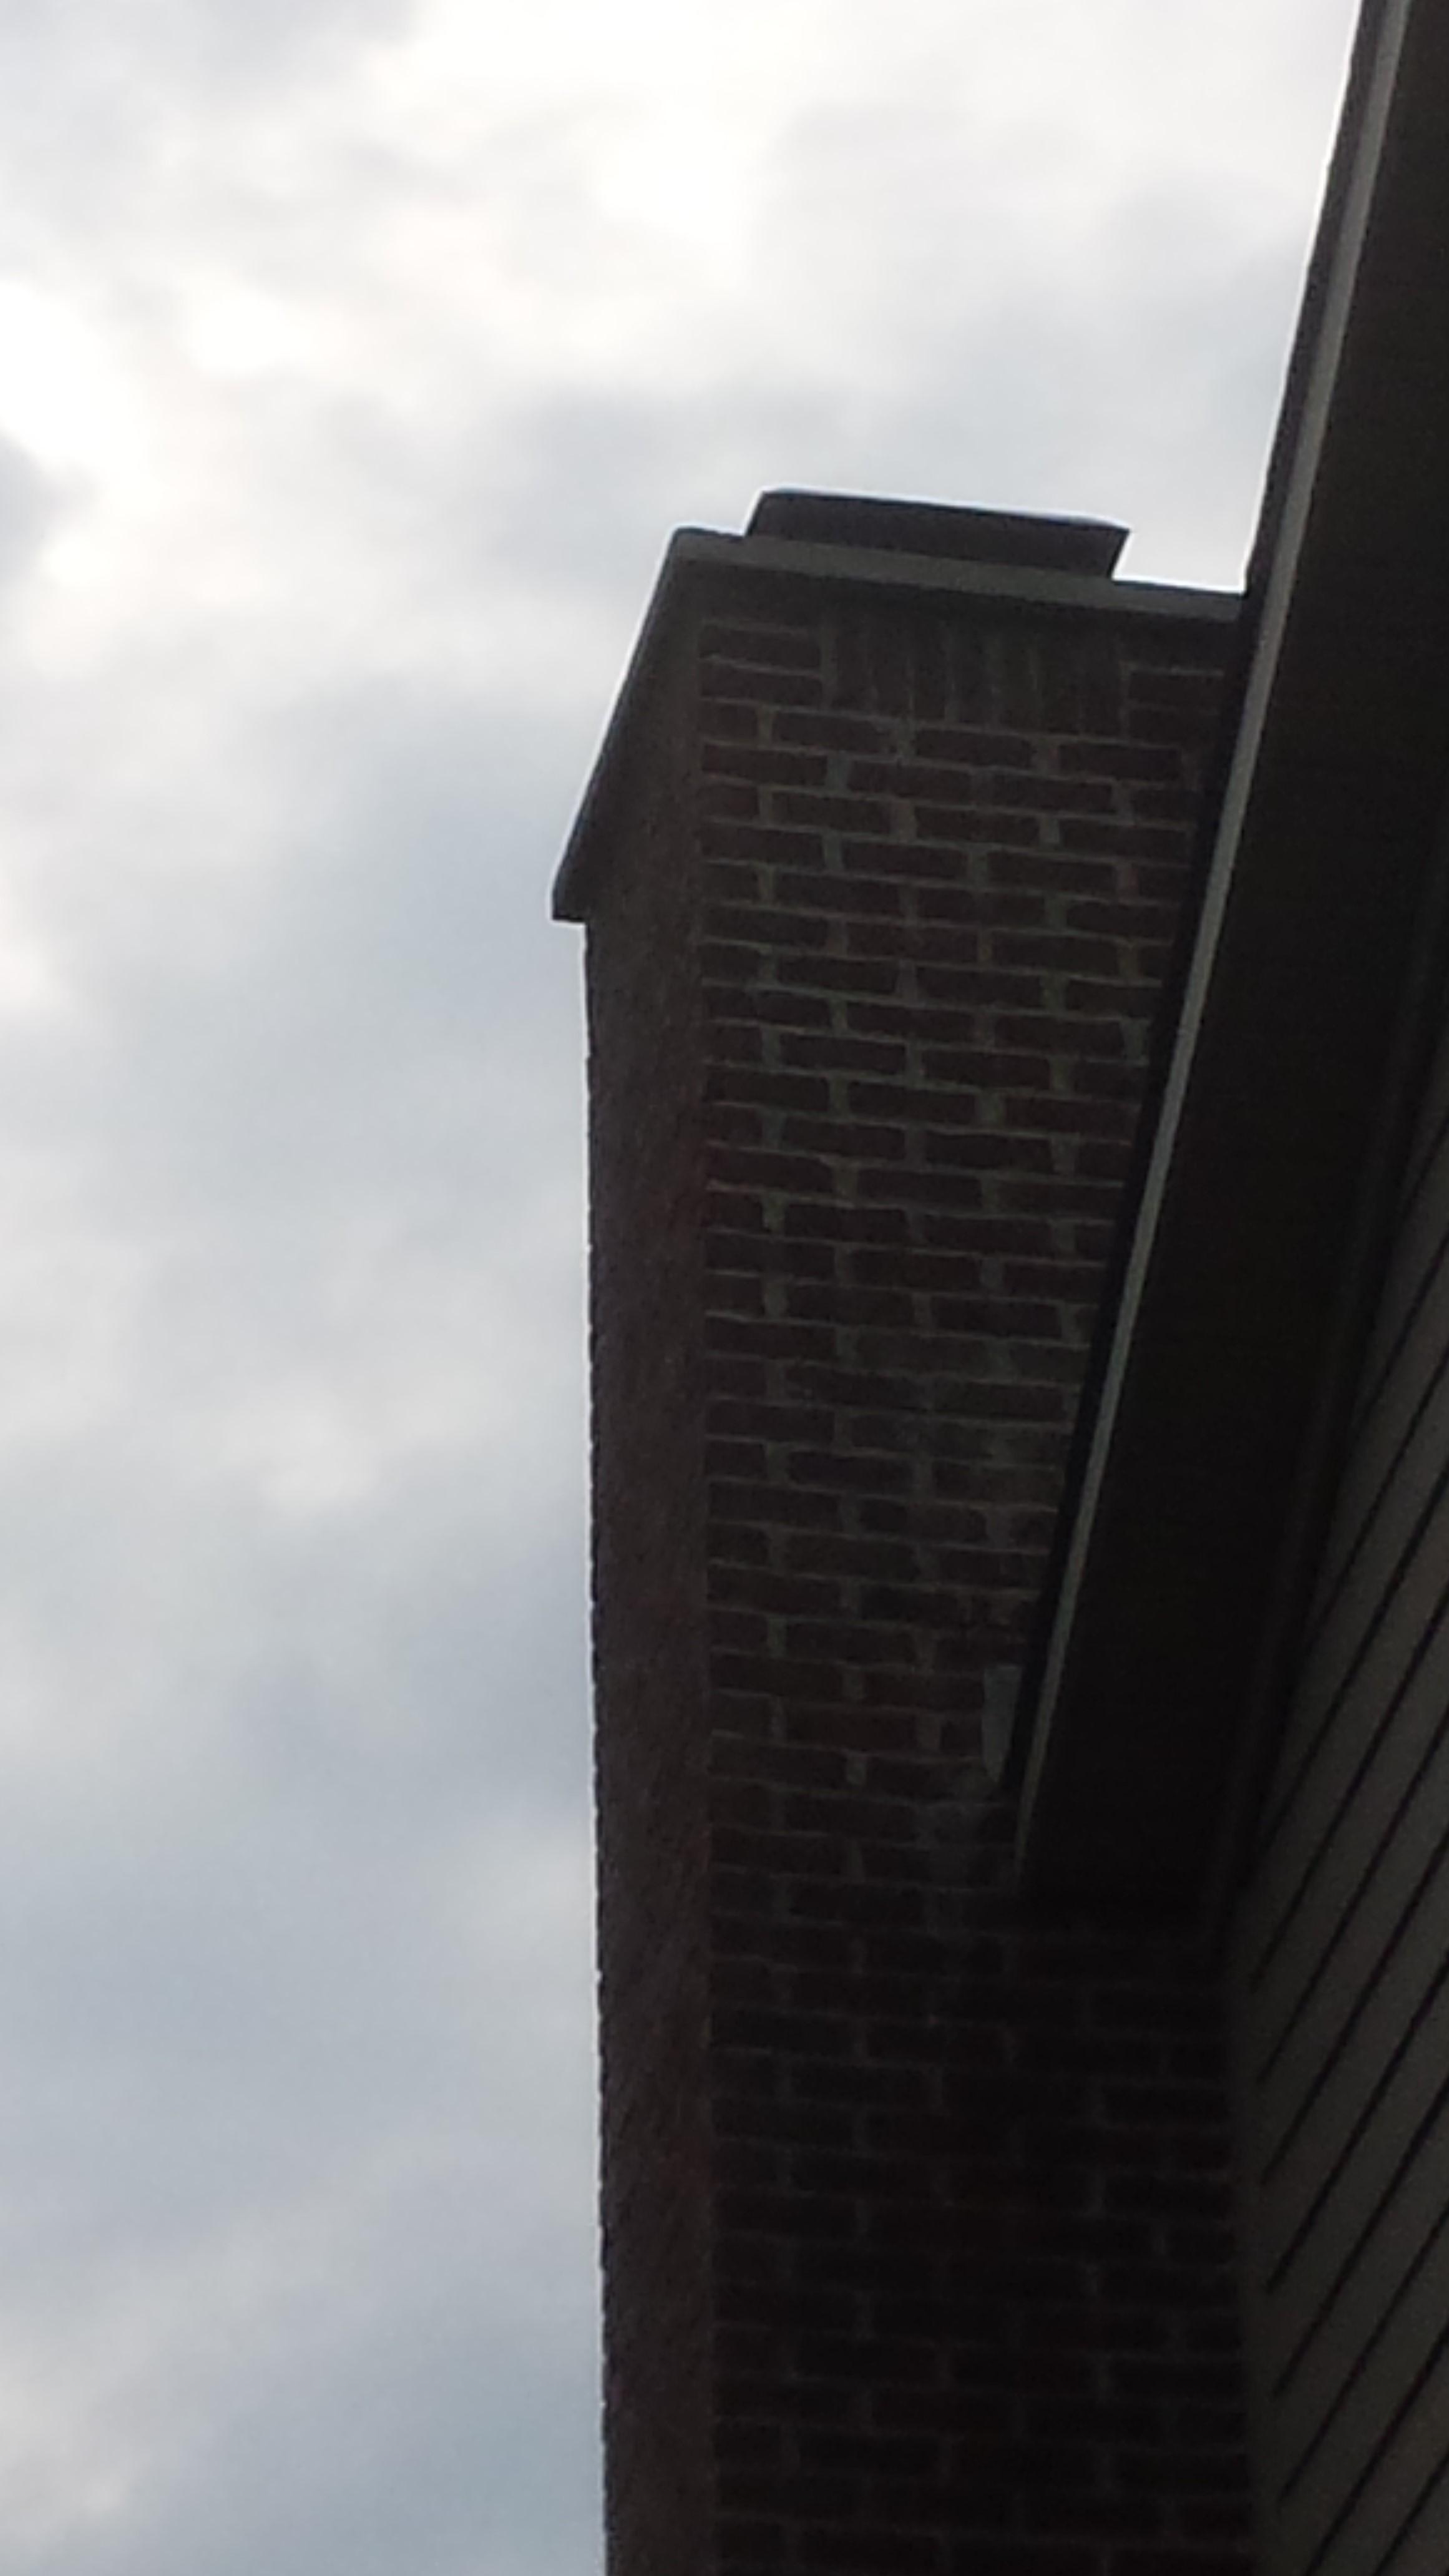 Chimney was leaking in to home from metal chimney cap. We took off metal and installed a new concrete cap